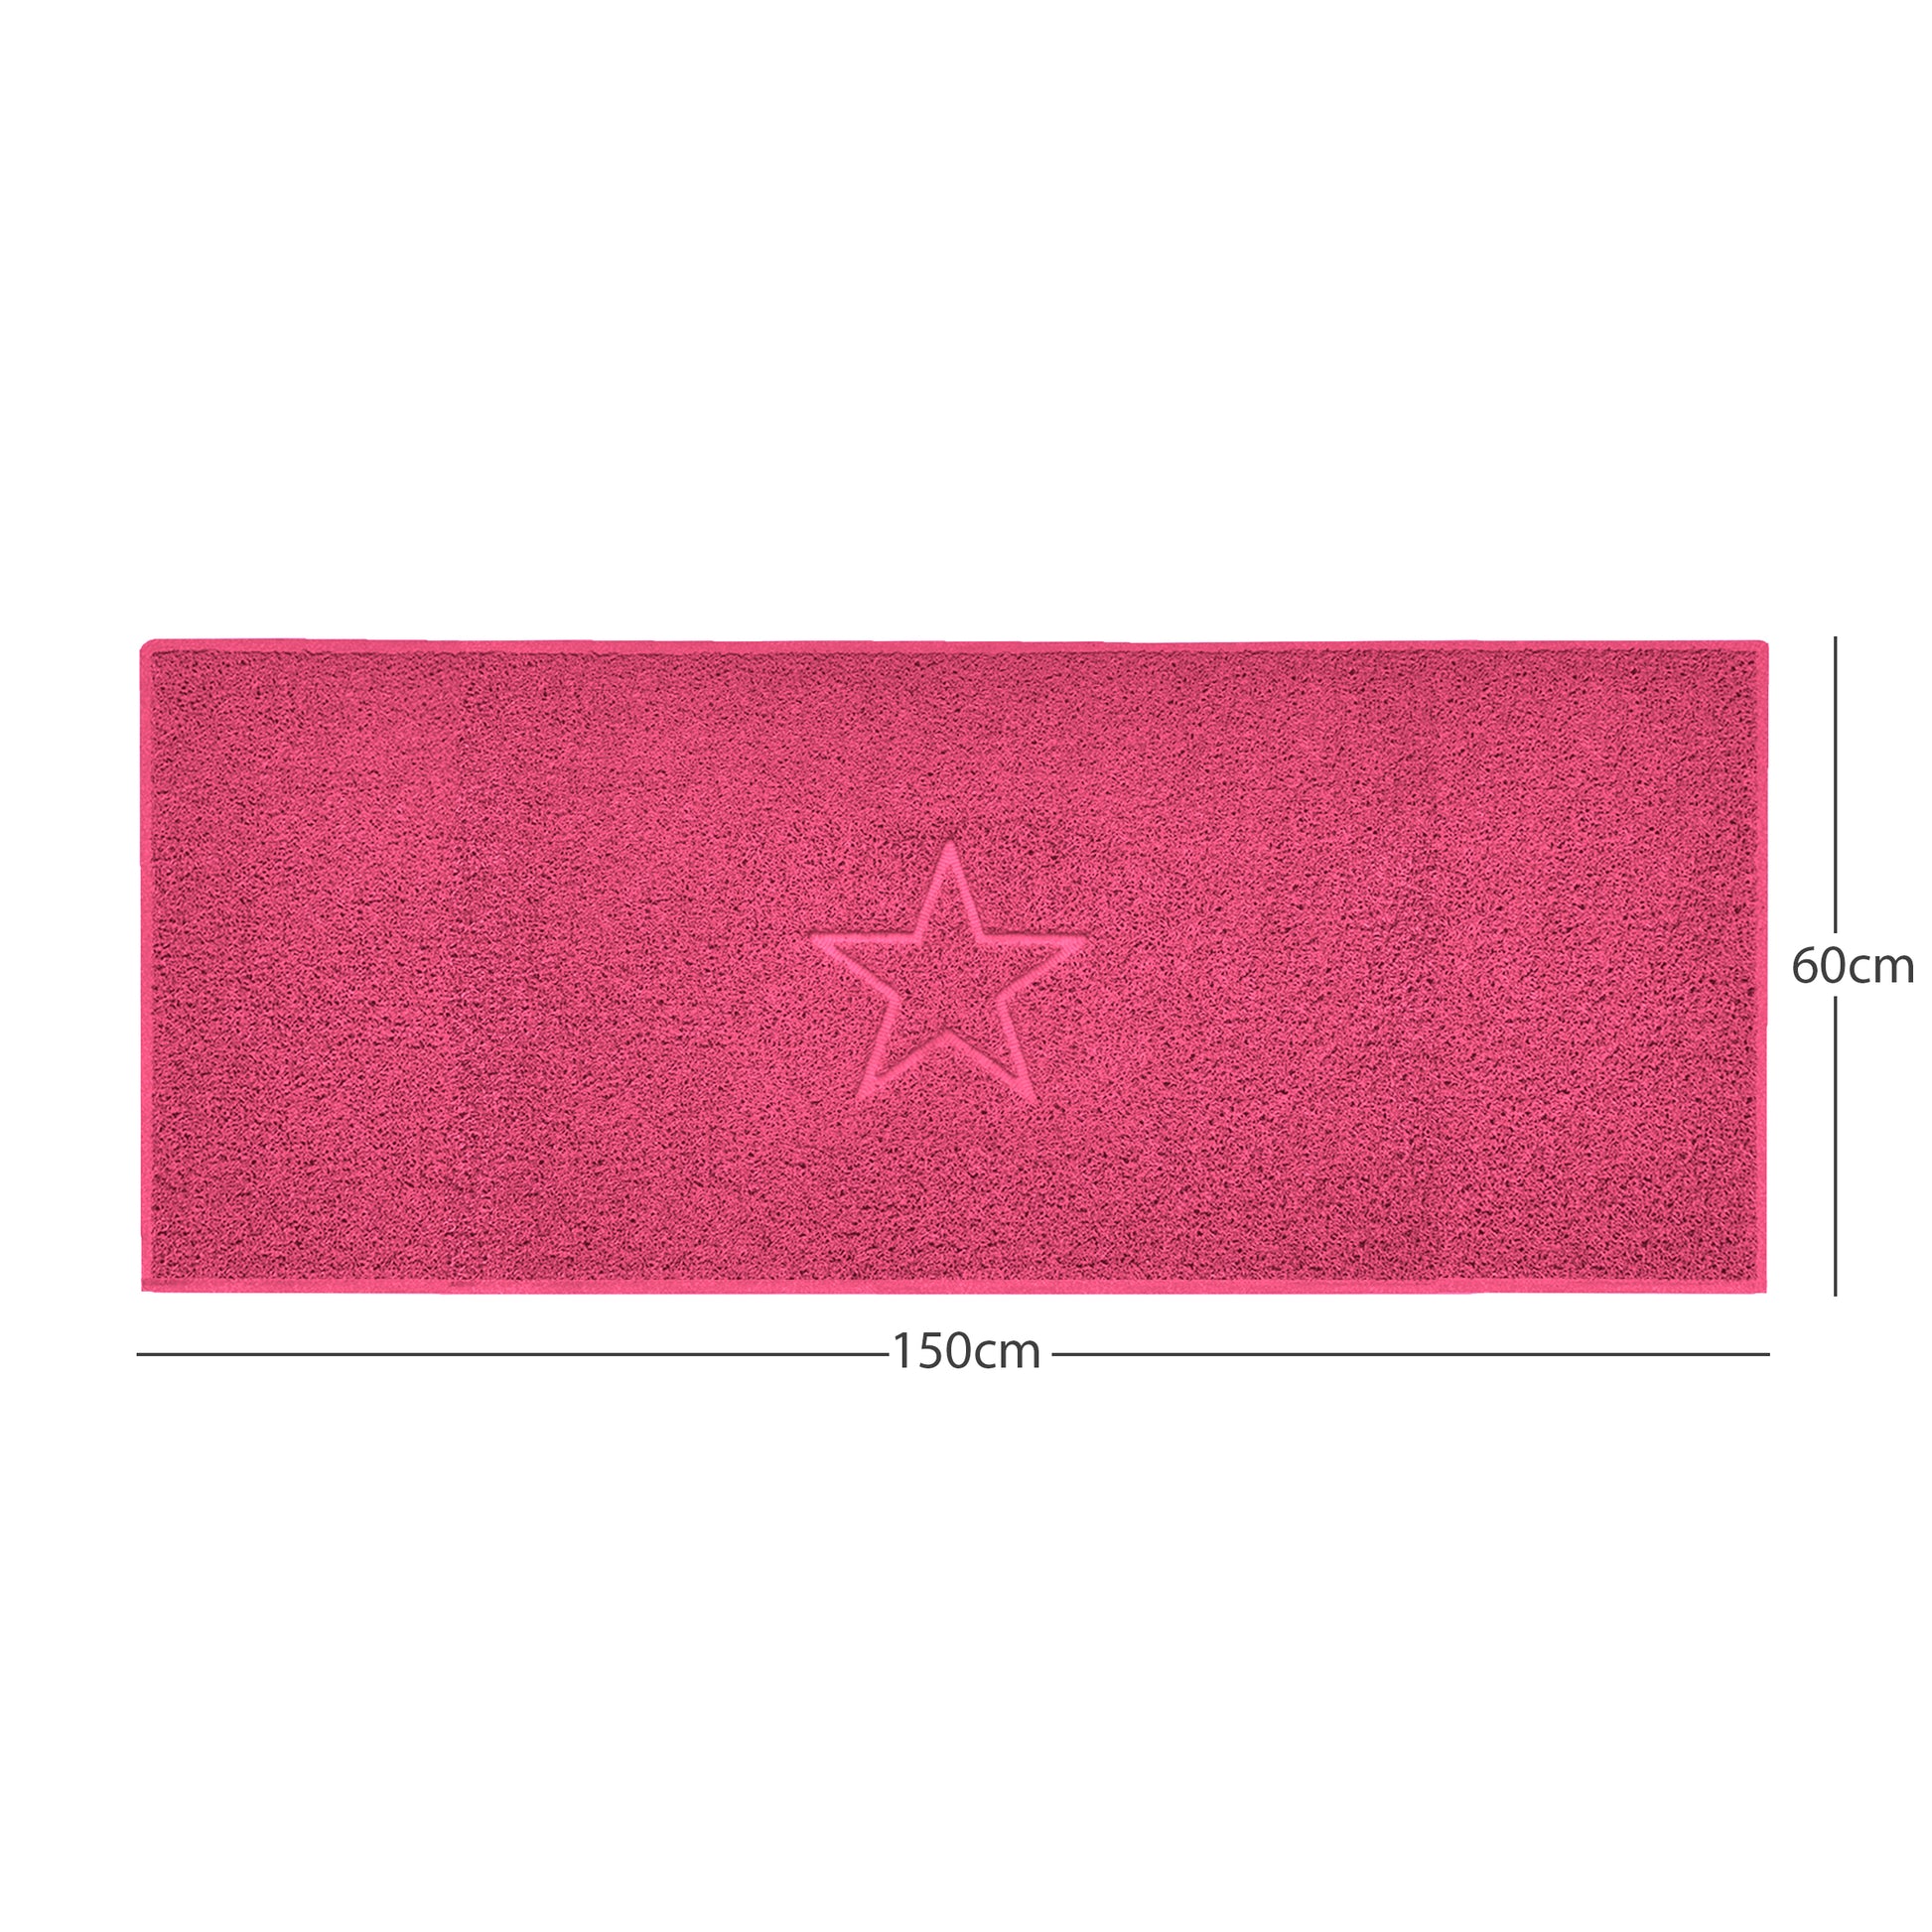 nicoman pink spaghetti indoor mat, multi colour options, free delivery, uk made